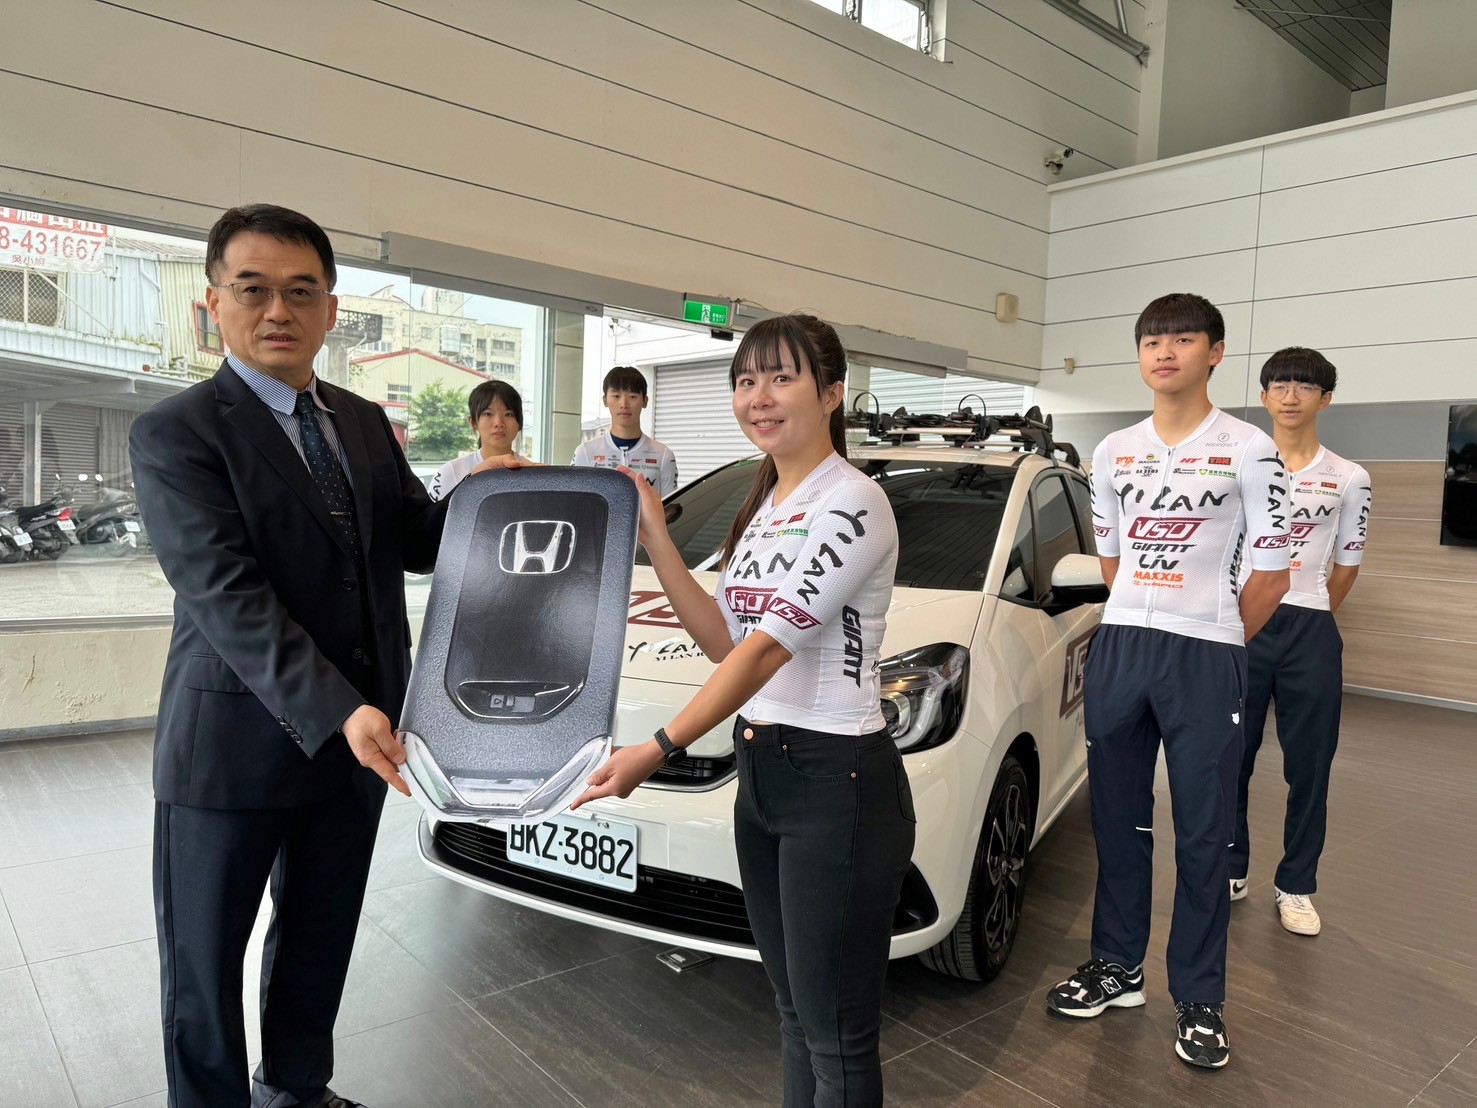 Yilan Cycling Team Handover Ceremony of Old and New Team Vehicles